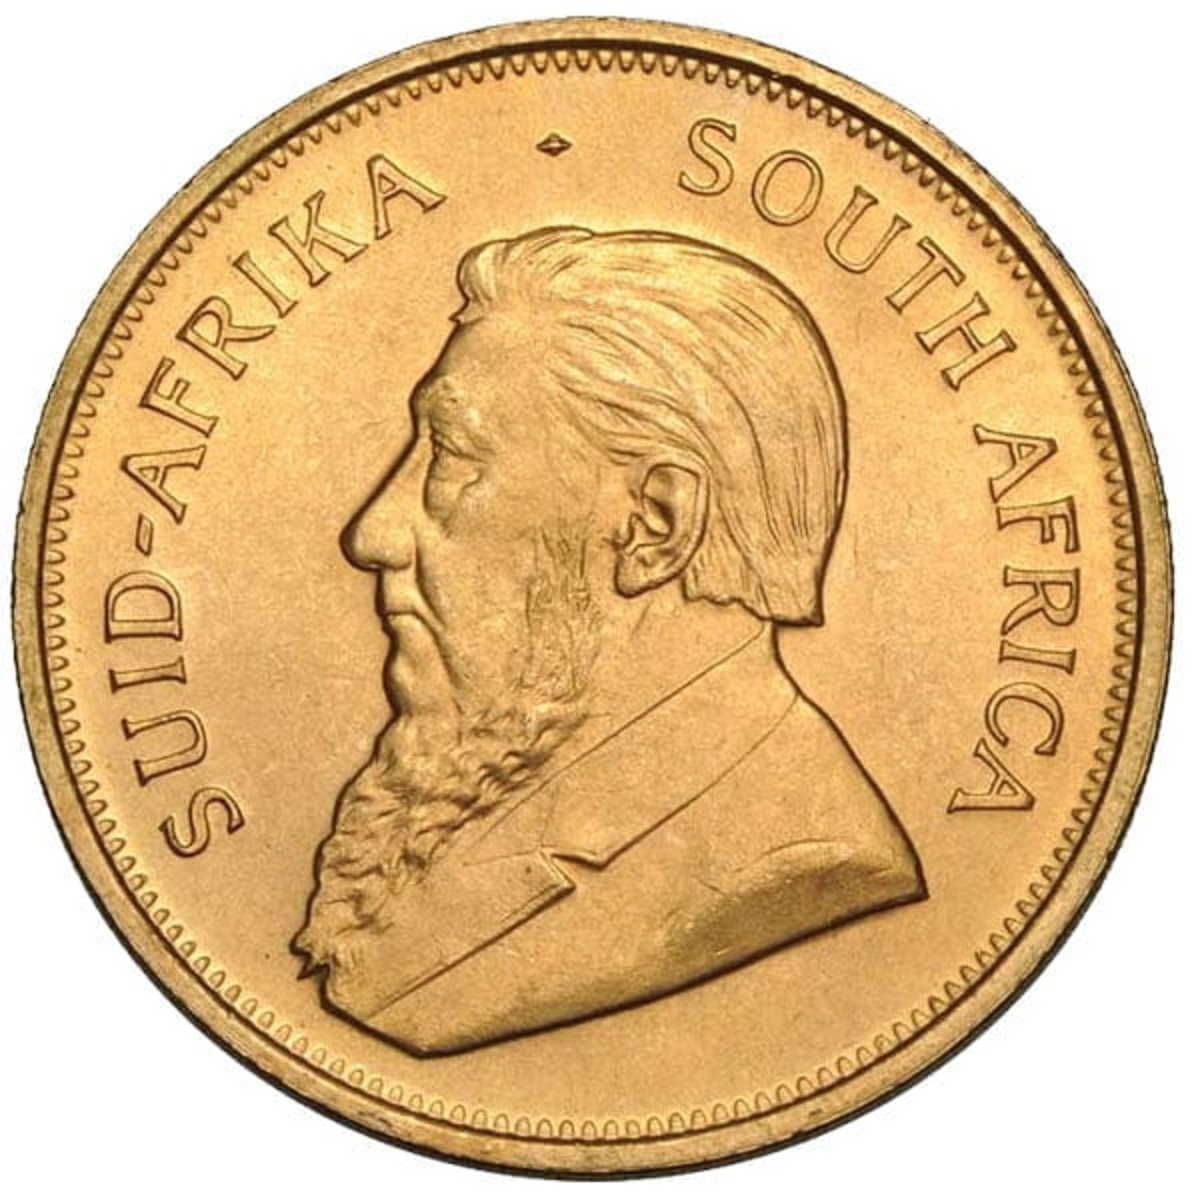 The Afrikaans and English languages appear on South African Krugerrands. Plans call for using 11 official languages on future circulation South African coins.